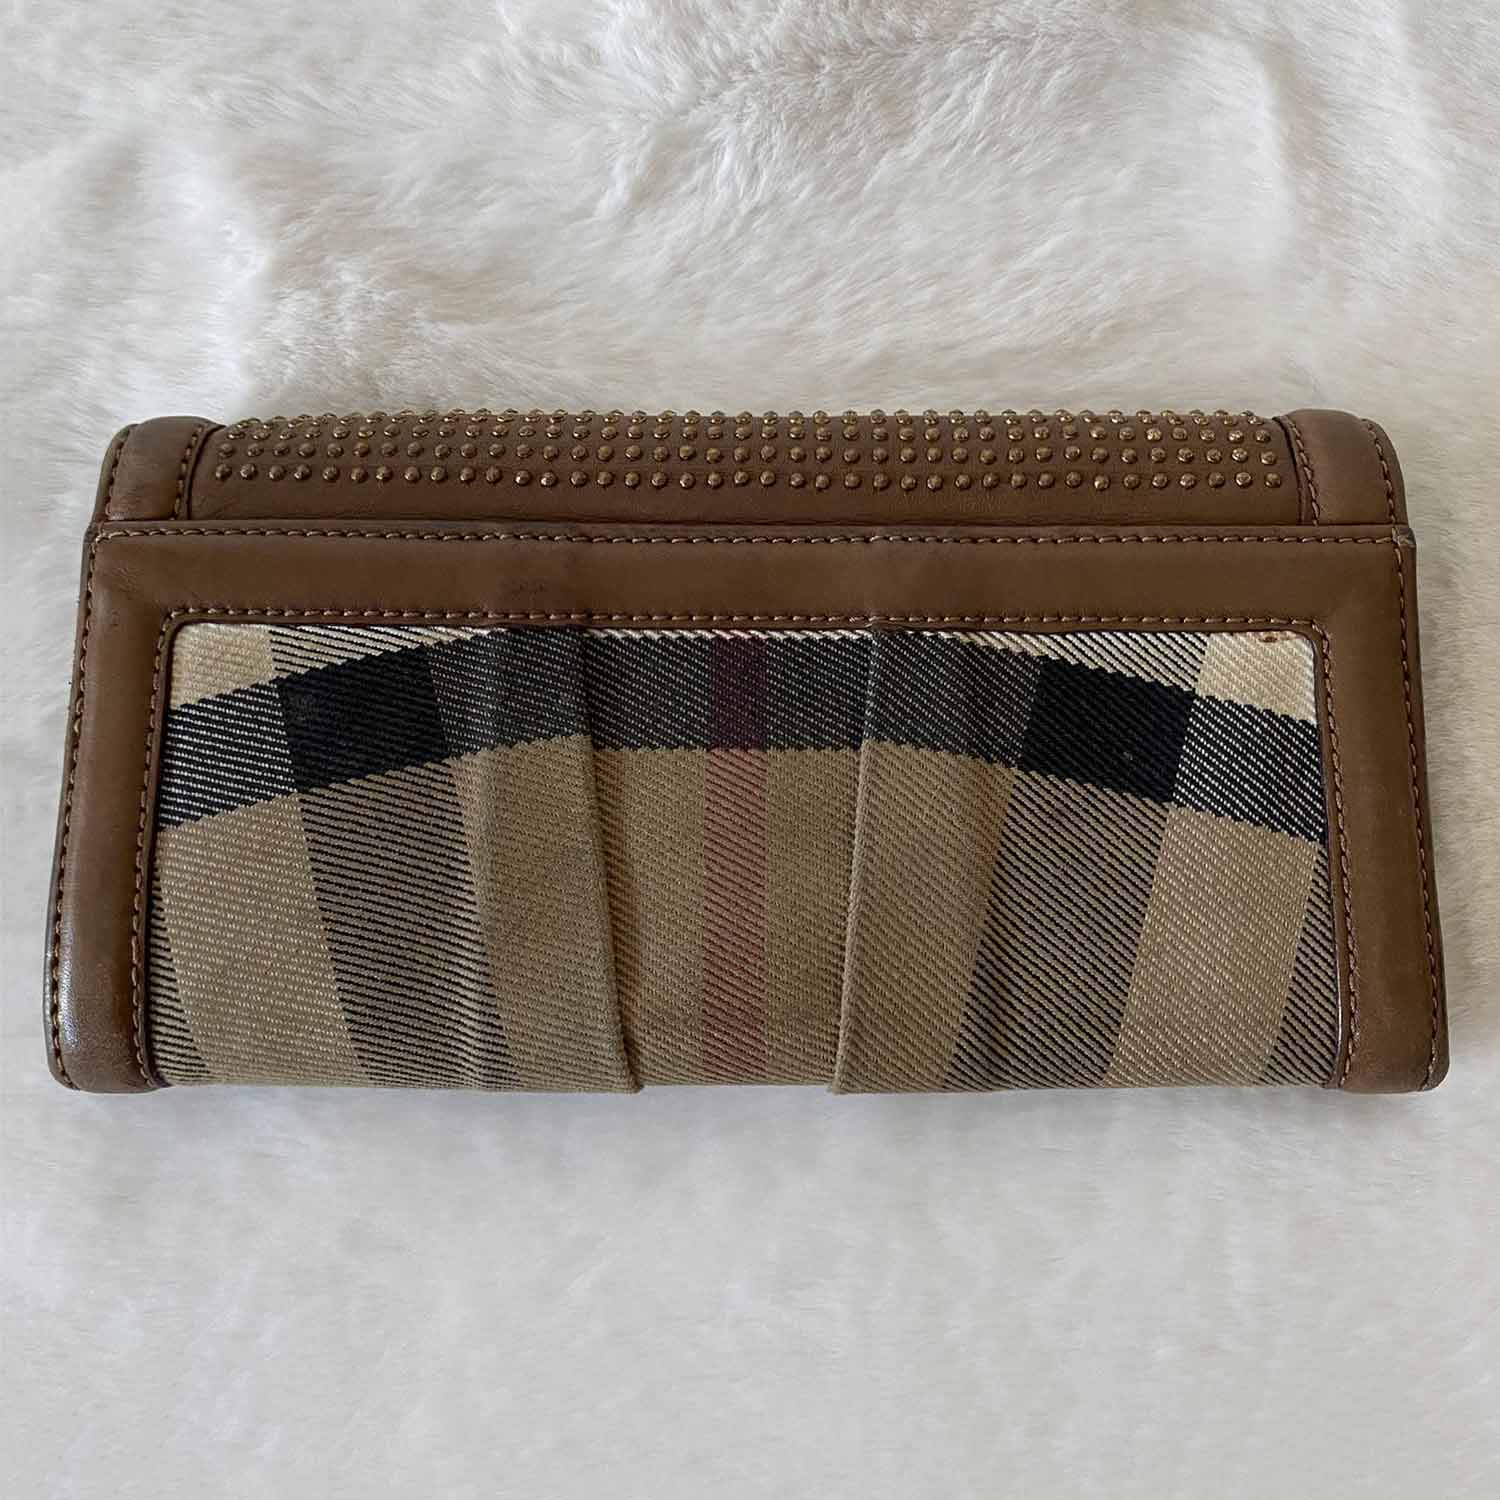 Shop authentic Burberry House Check Studded Wallet at revogue for just ...